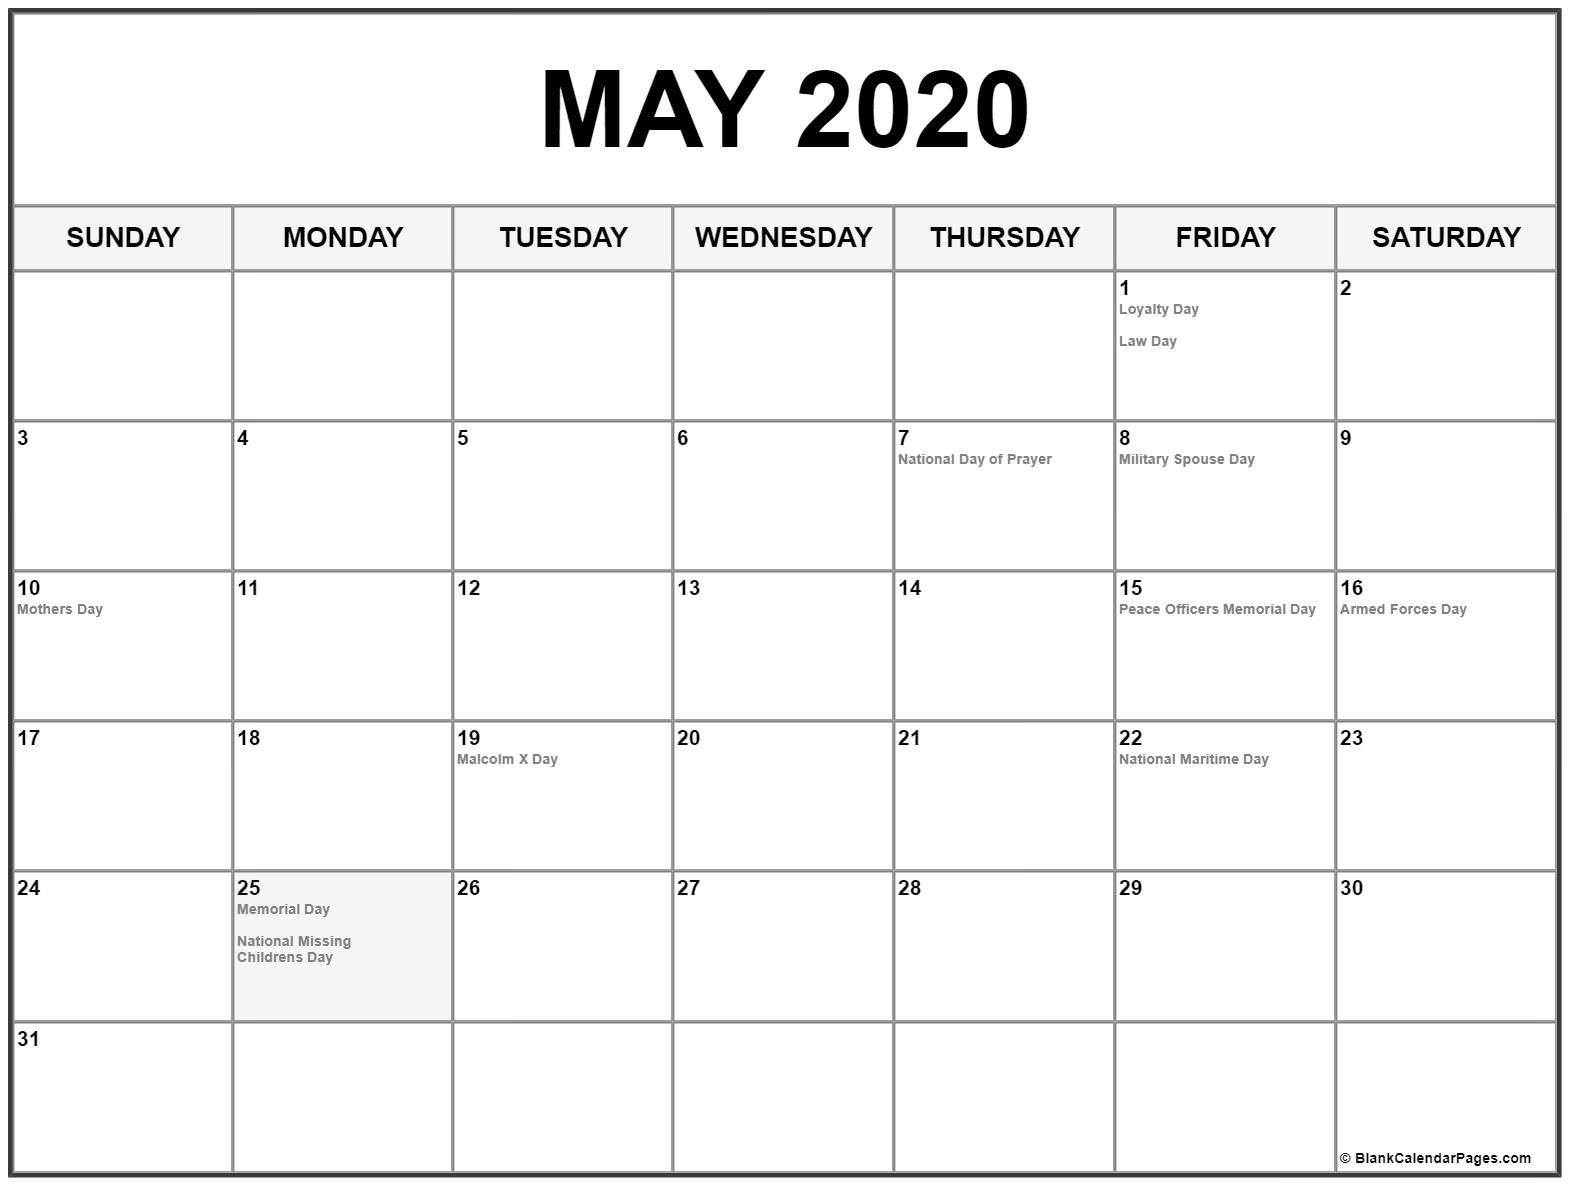 Collection Of May 2020 Calendars With Holidays-2020 May All Holidays